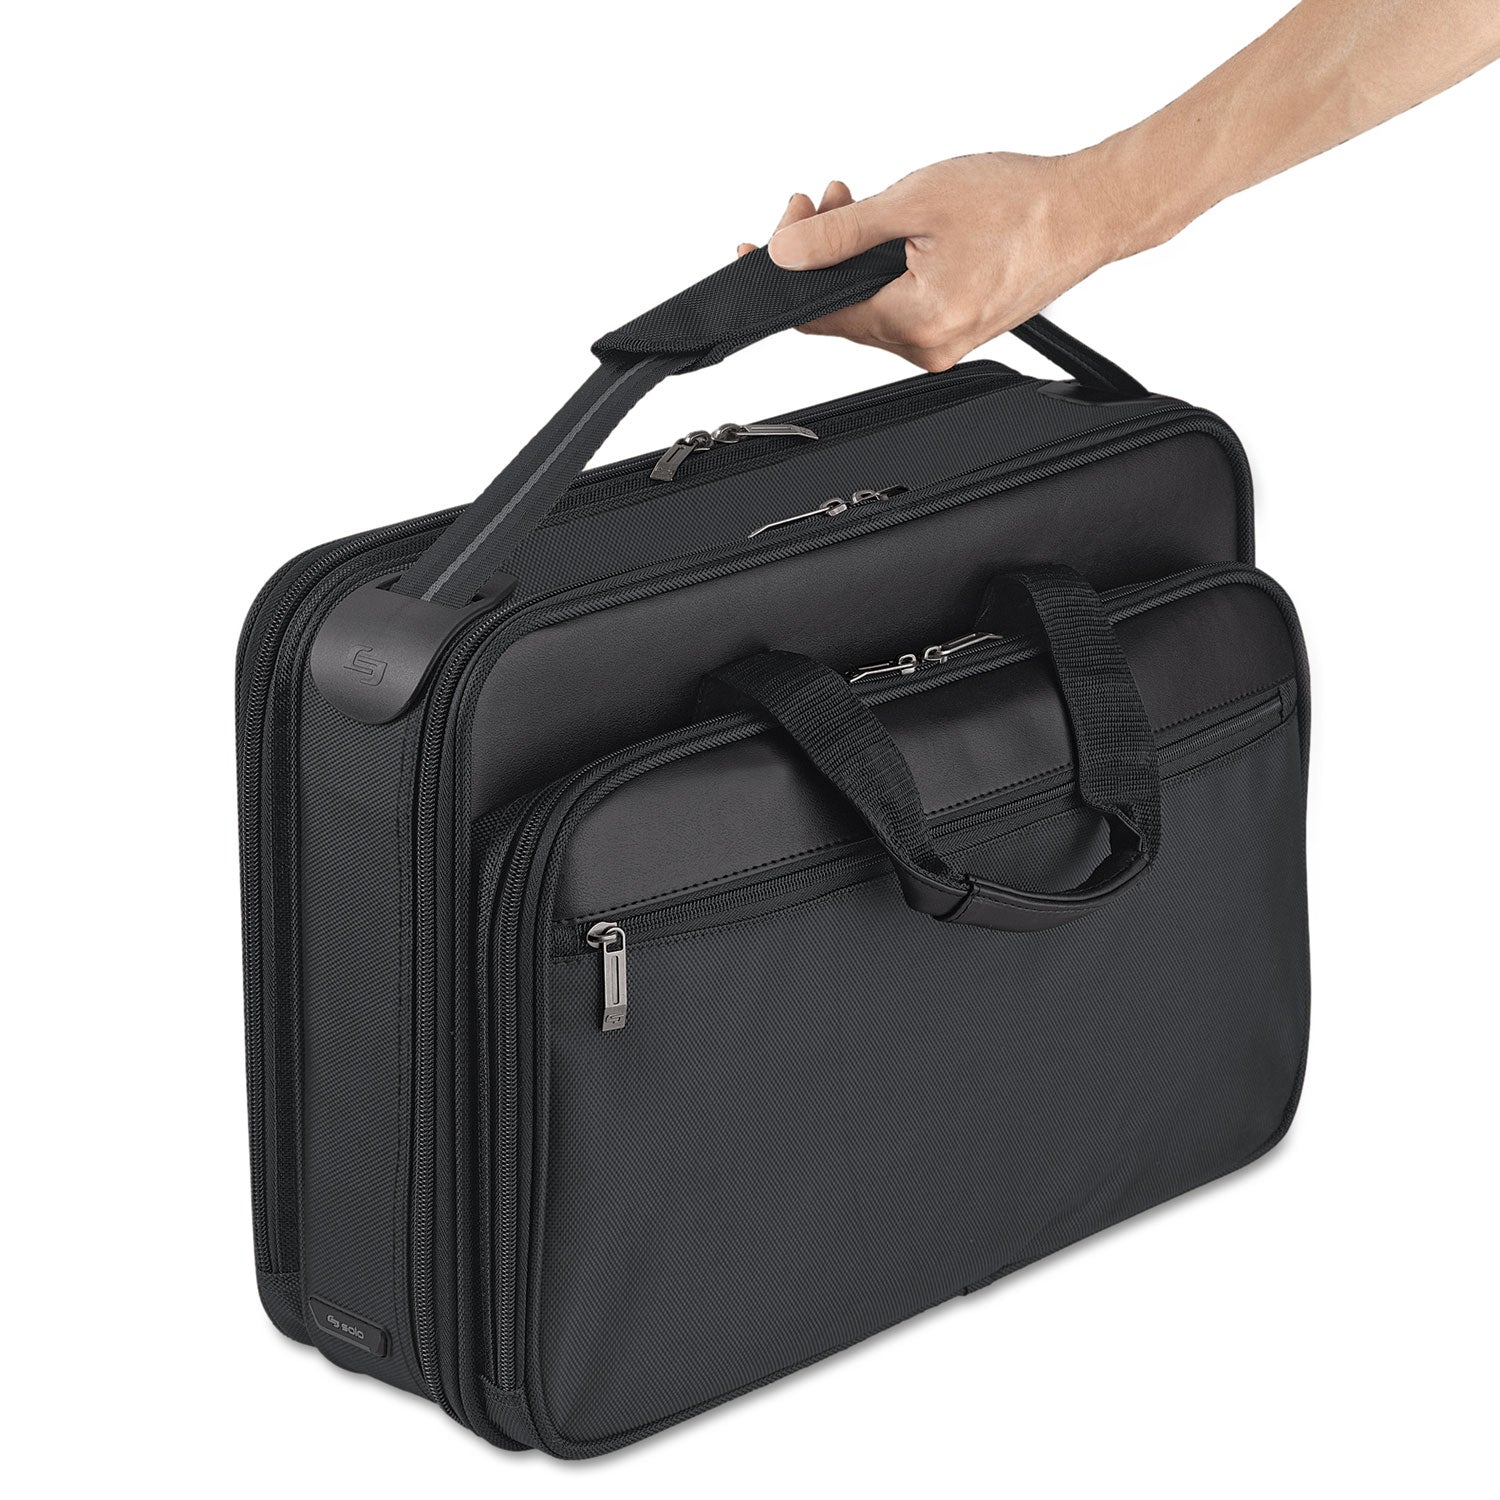 Classic Smart Strap Briefcase, Fits Devices Up to 16", Ballistic Polyester, 17.5 x 5.5 x 12, Black - 